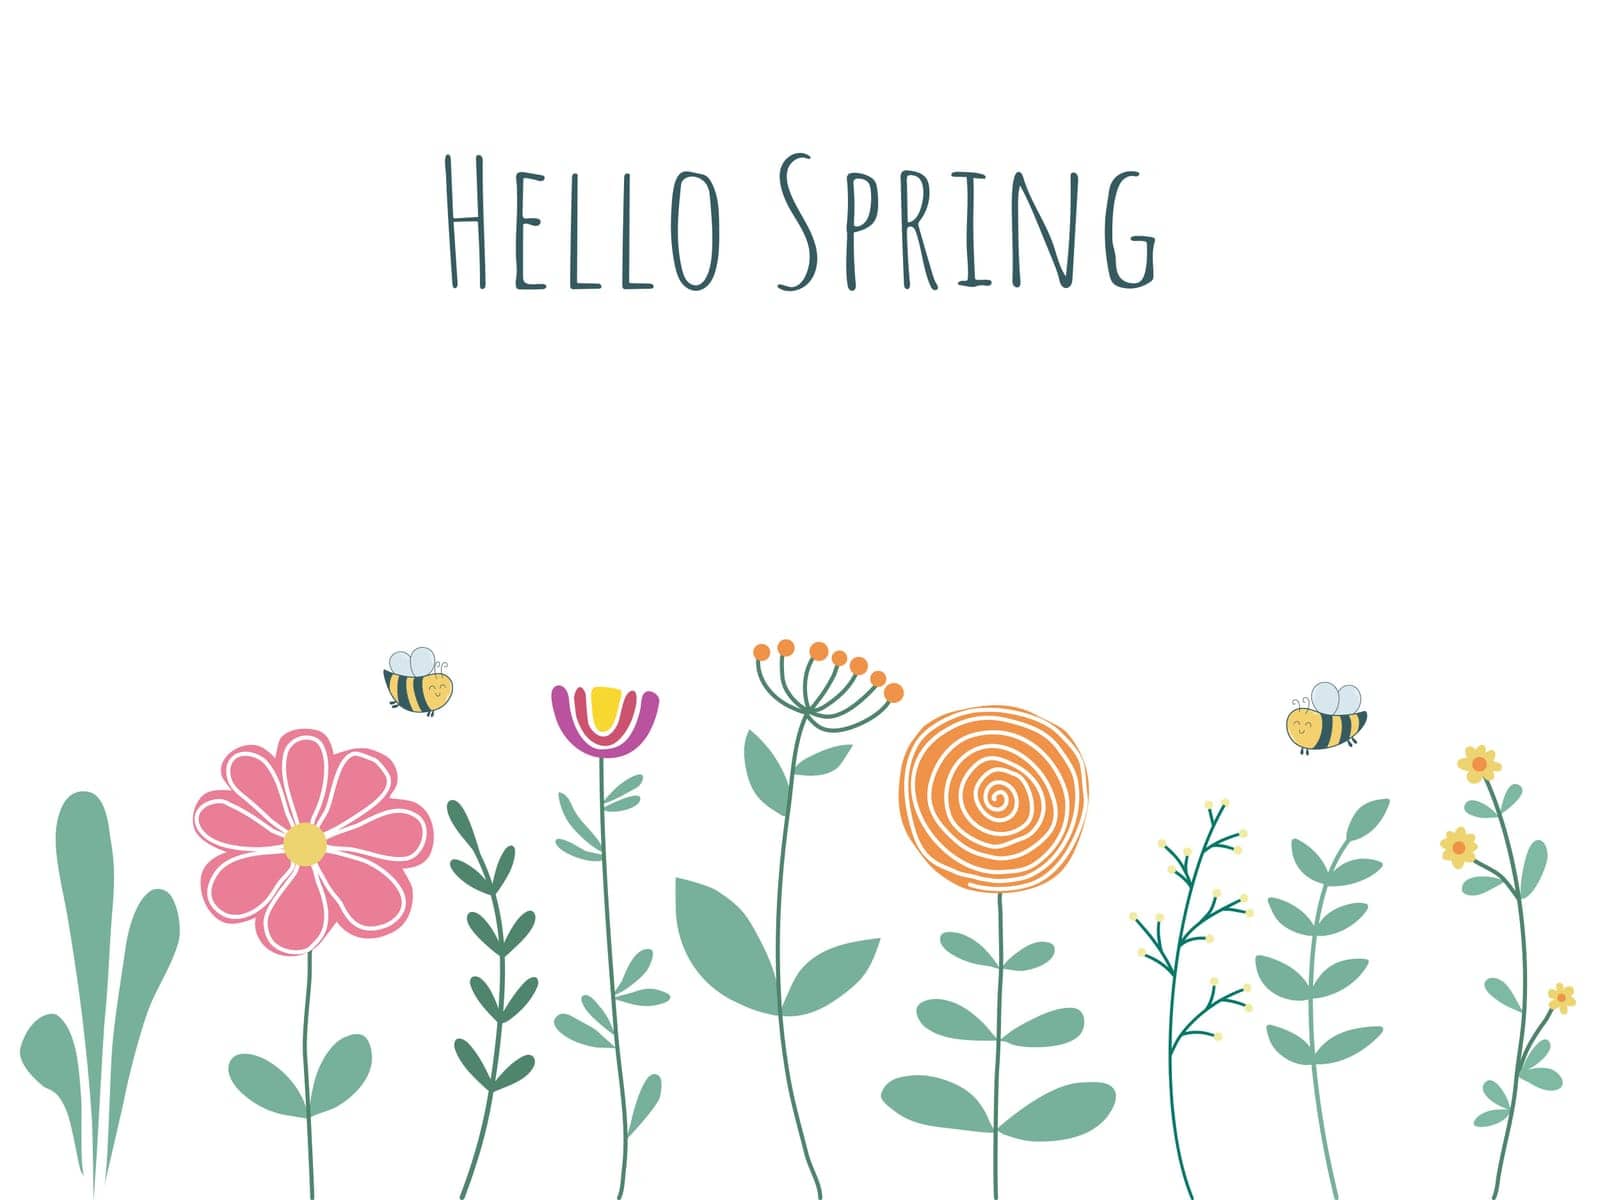 Spring card with bees, flowers, herbs and inscription. Hello spring handwritten text. Cute botanical floral design with coligraphy, vector illustration